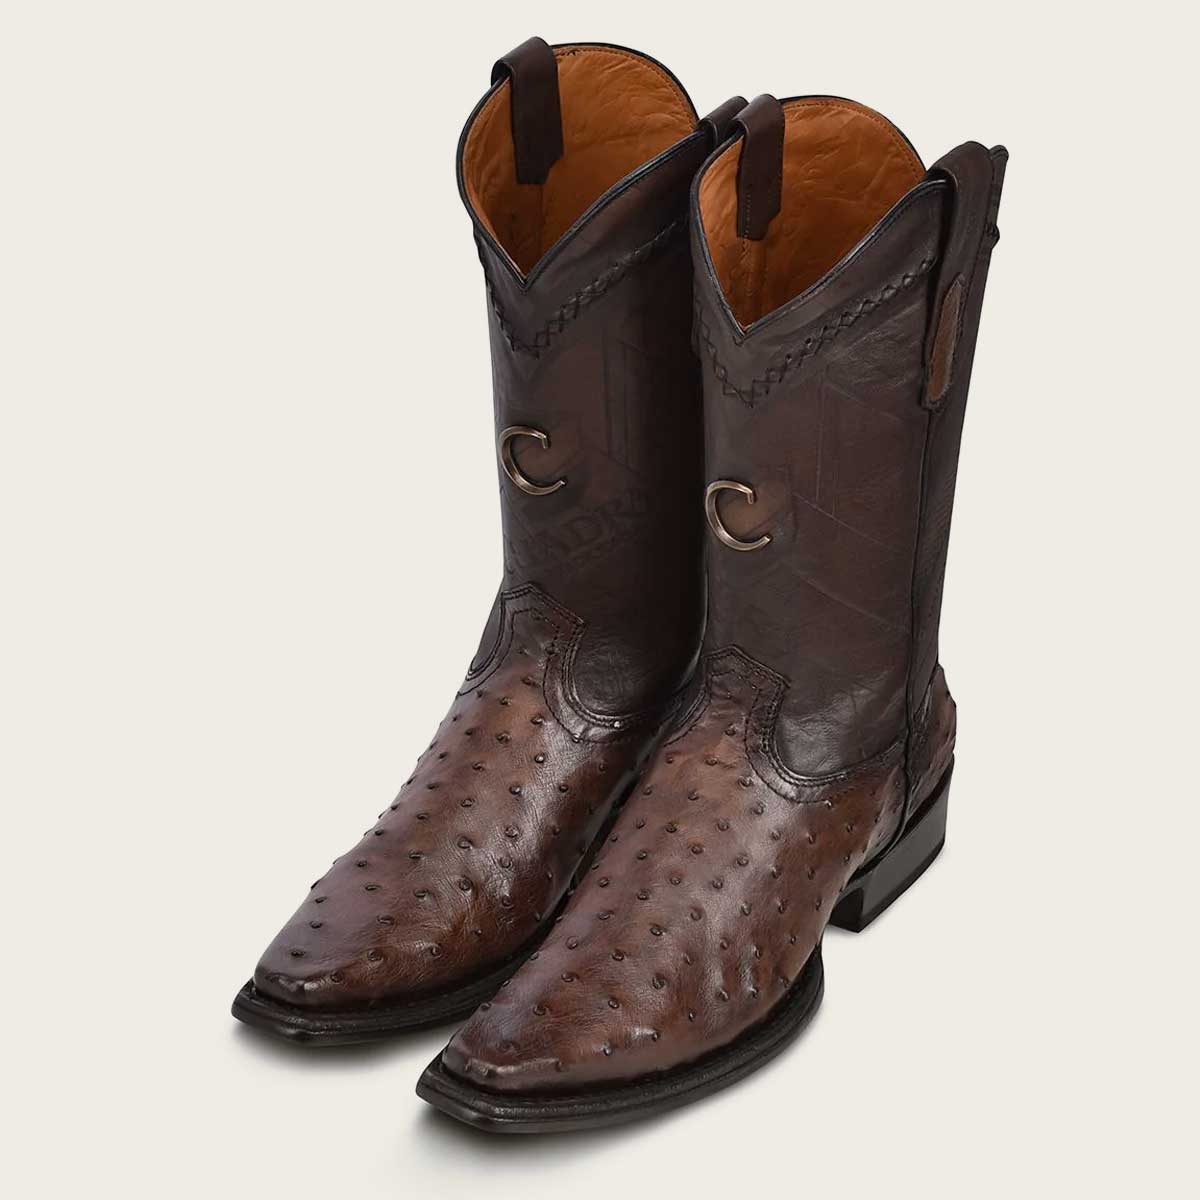 Whether at an event, outdoors, or making a style statement, these premium engraved dark brown leather boot exceed expectations. 